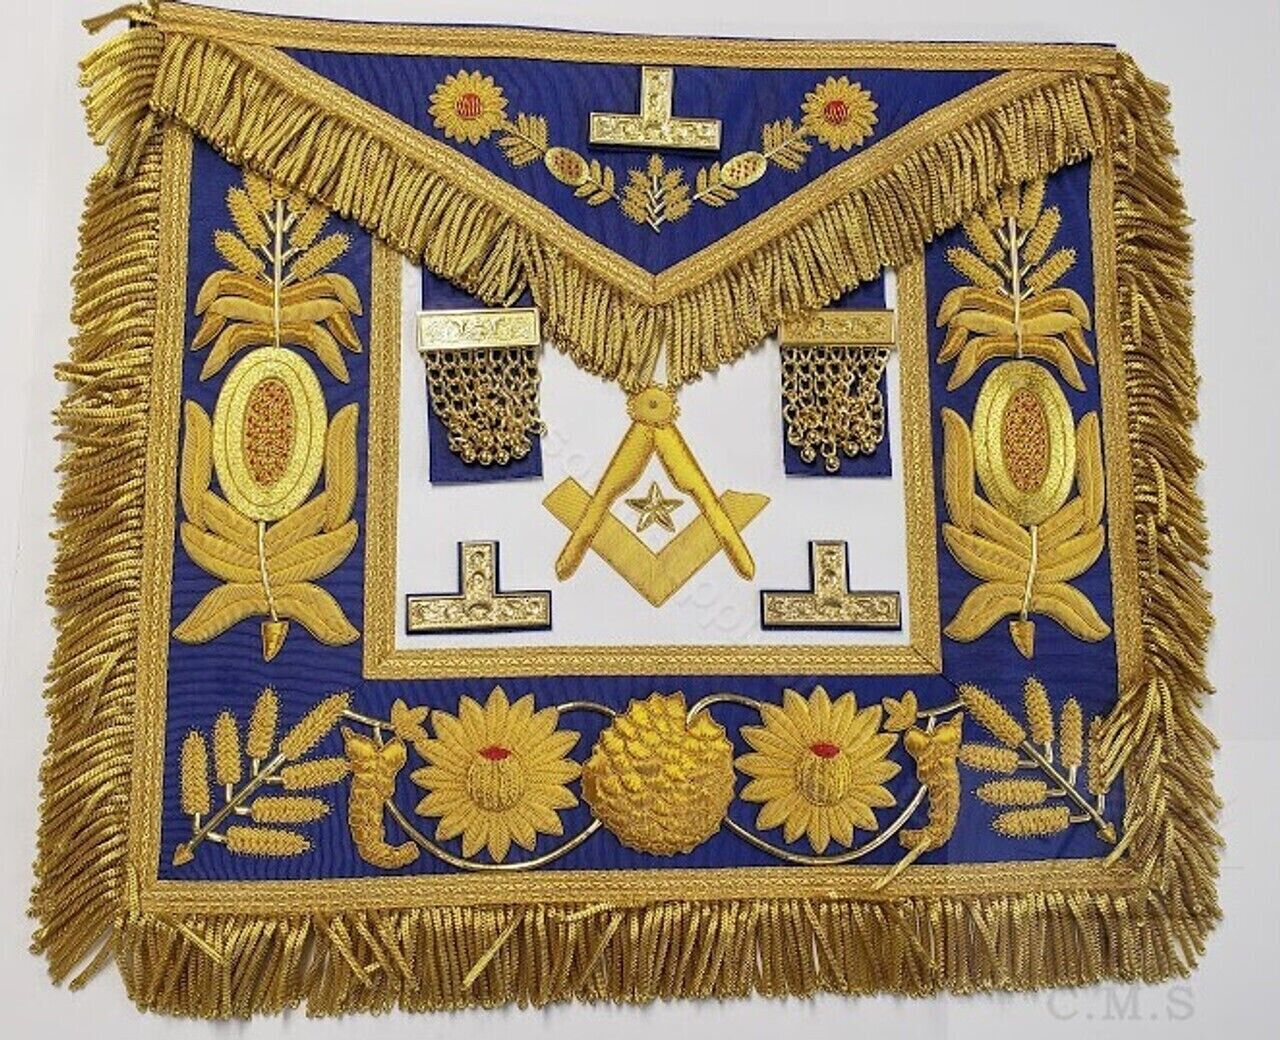 MASONIC HAND EMBROIDERED GRAND MASTER DRESS APRON WITH PREMIUM QUALITY